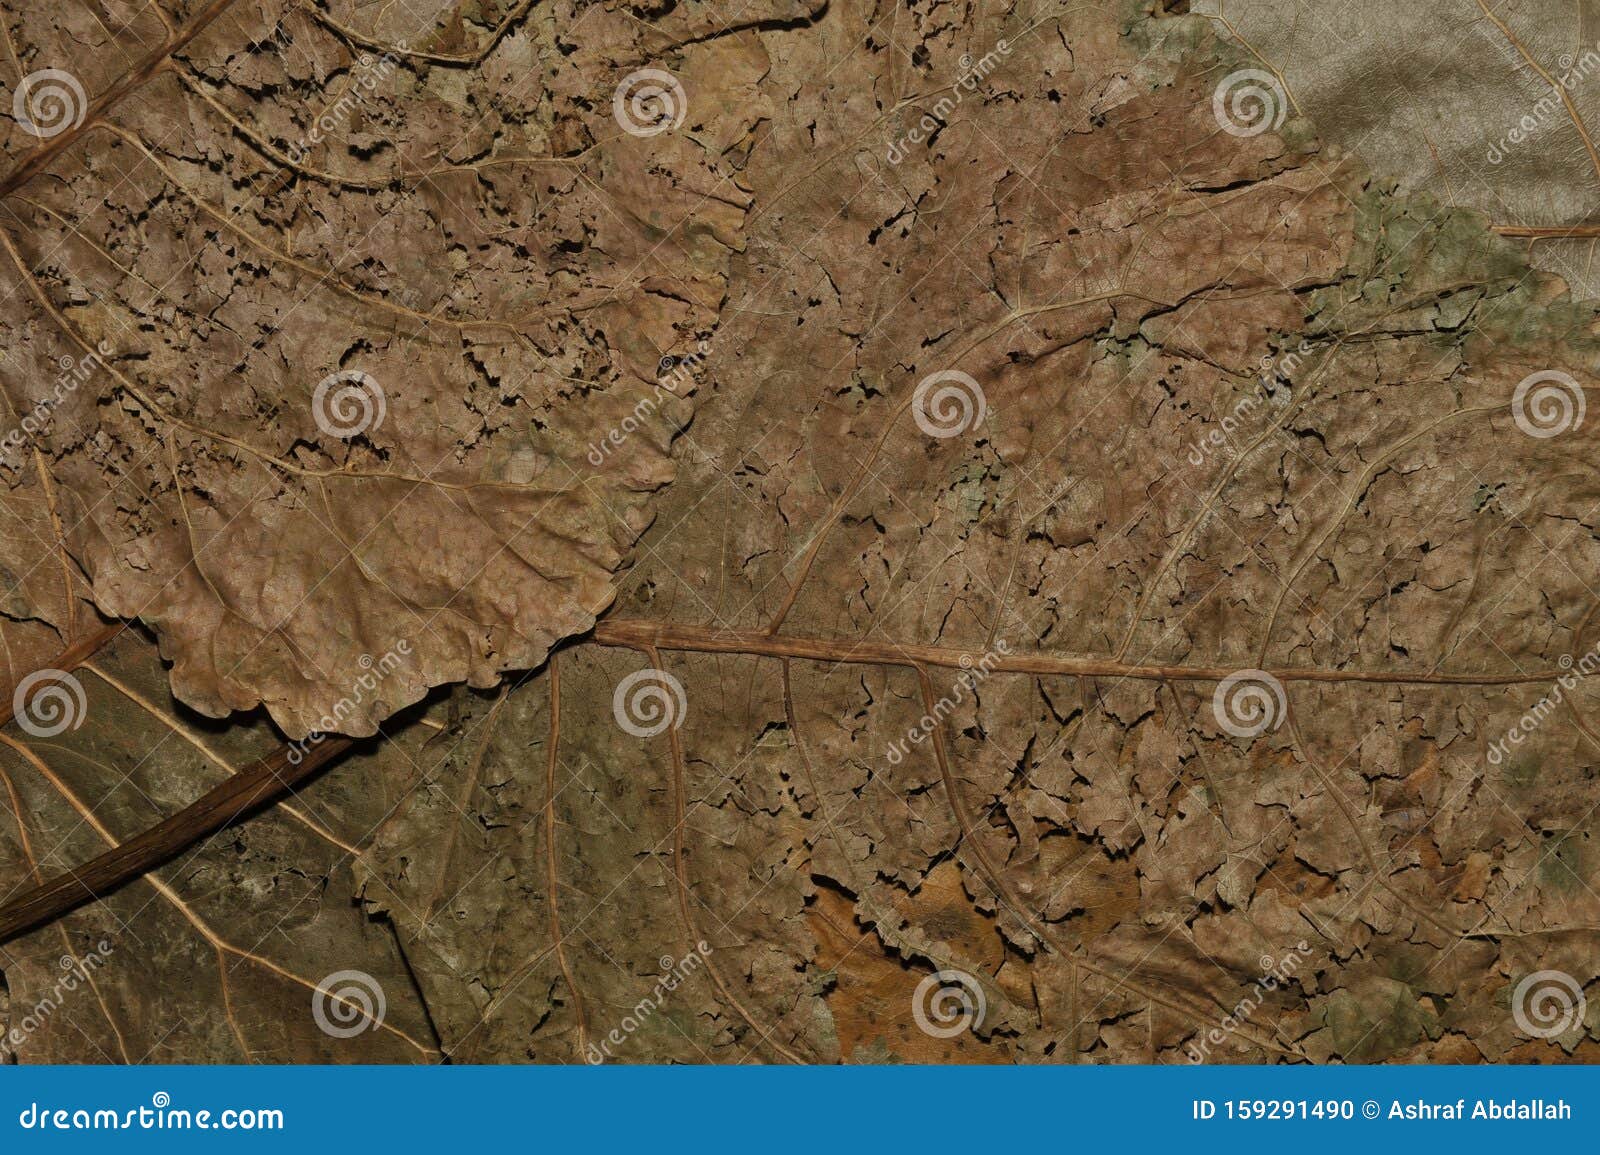 Colored Abstract Dried Leaves Textures Closeup Stock Photo - Image of ...